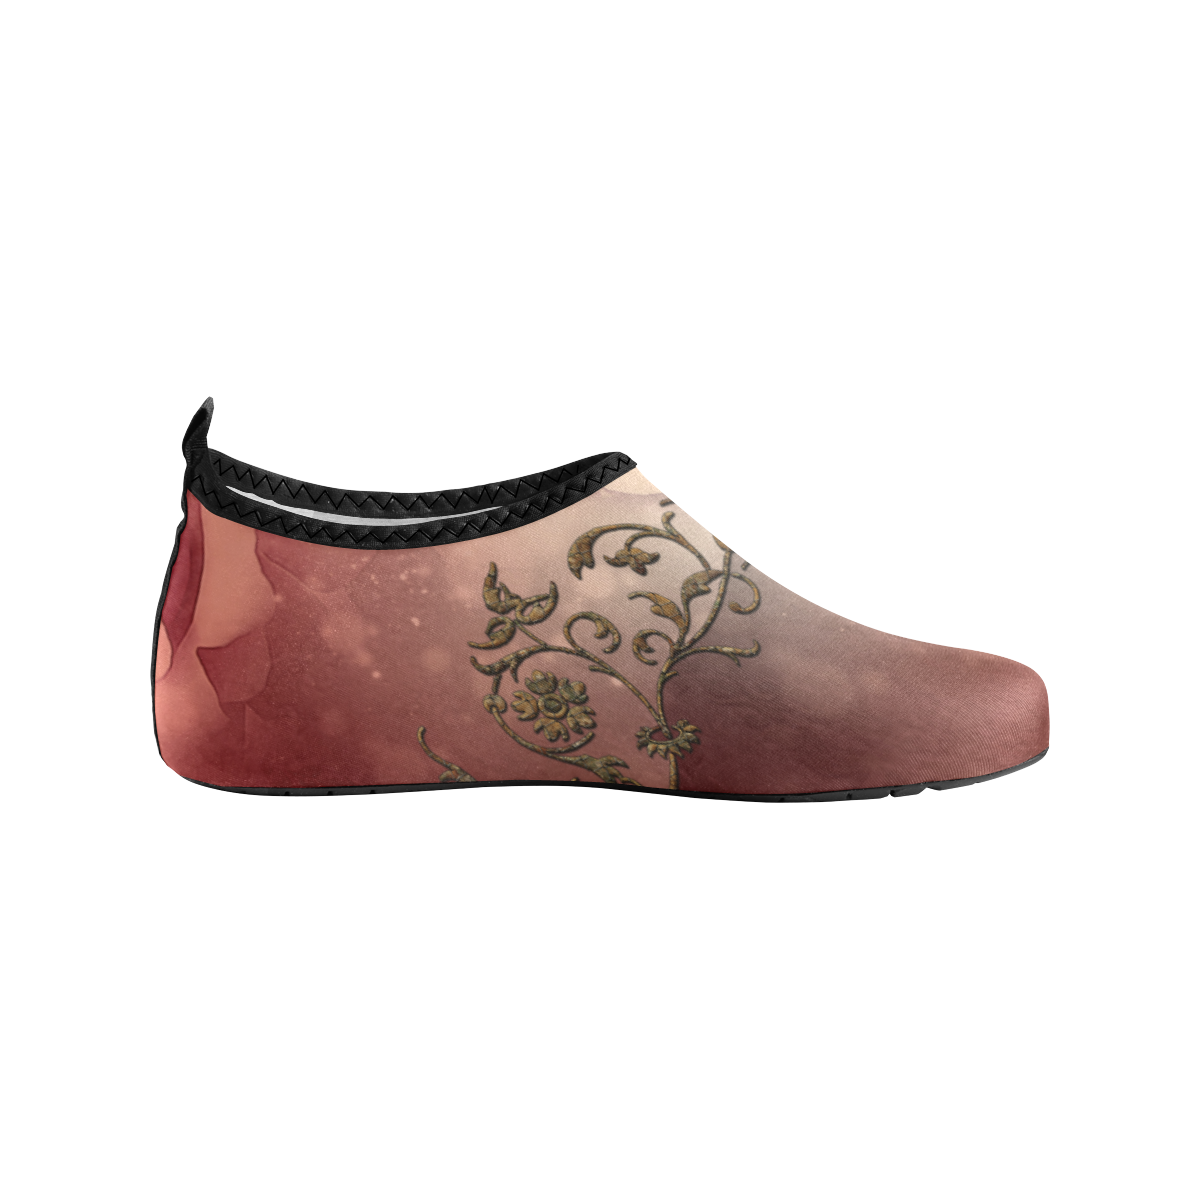 Wonderful roses with floral elements Men's Slip-On Water Shoes (Model 056)